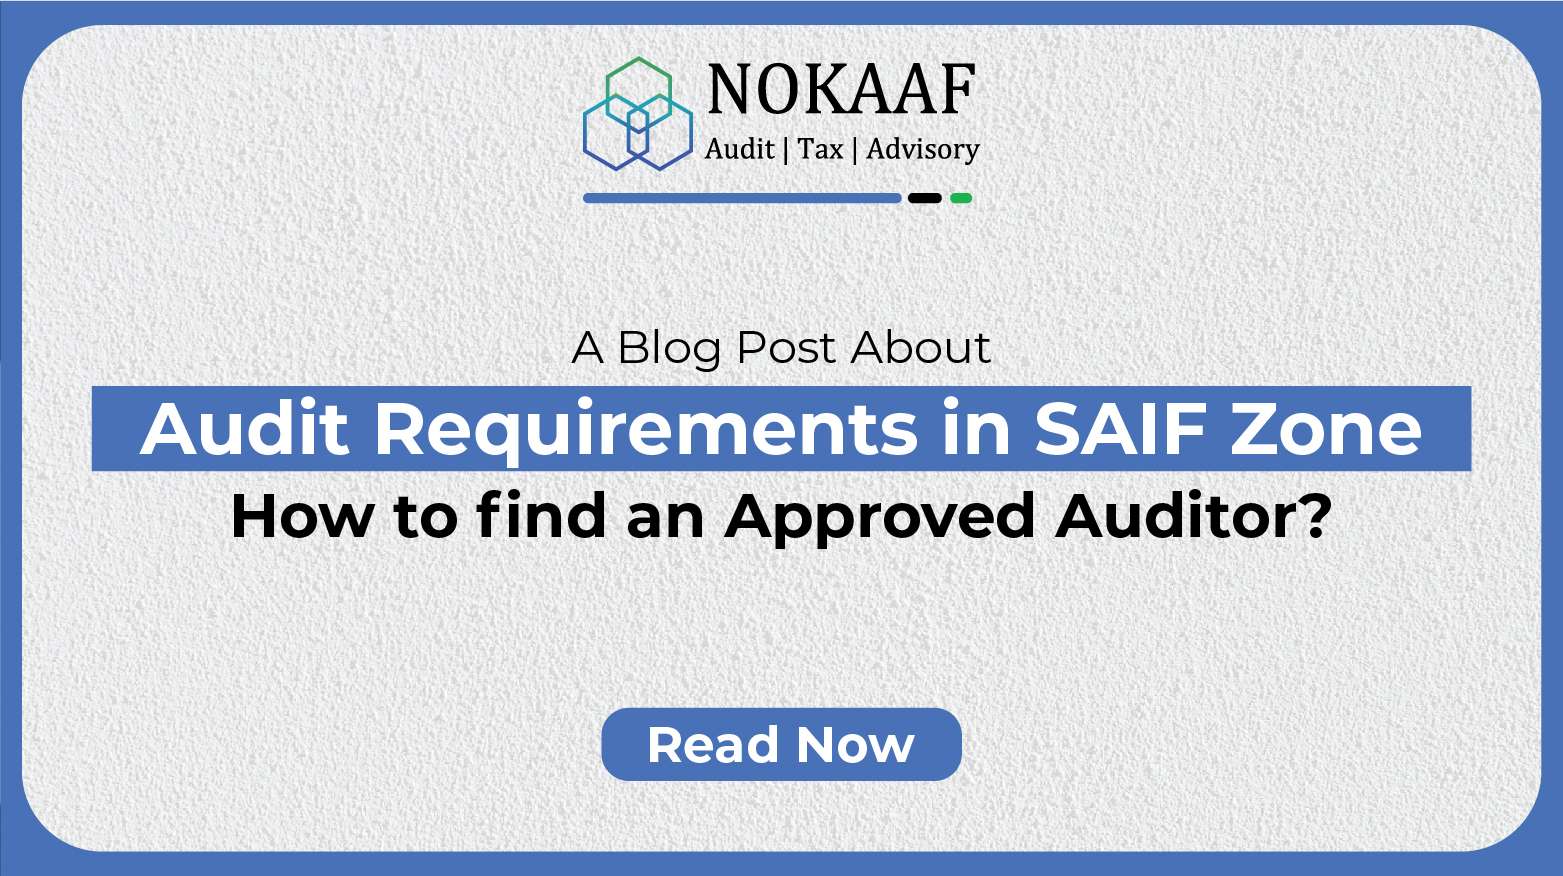 Audit Requirements in SAIF Zone